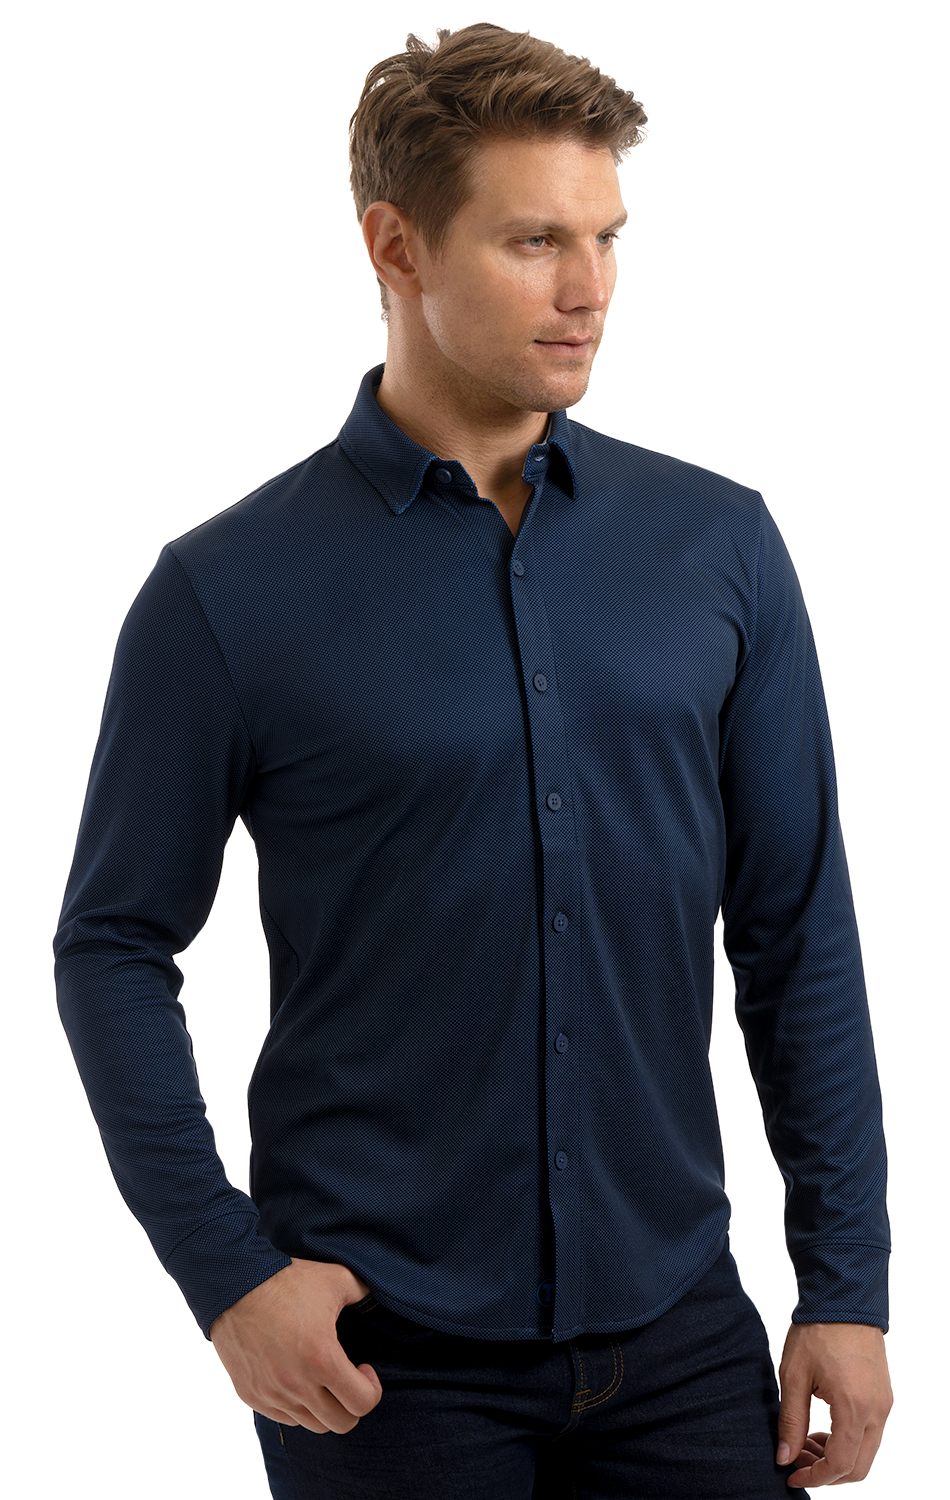 reviews out of 5 stars reviews performance button down polo